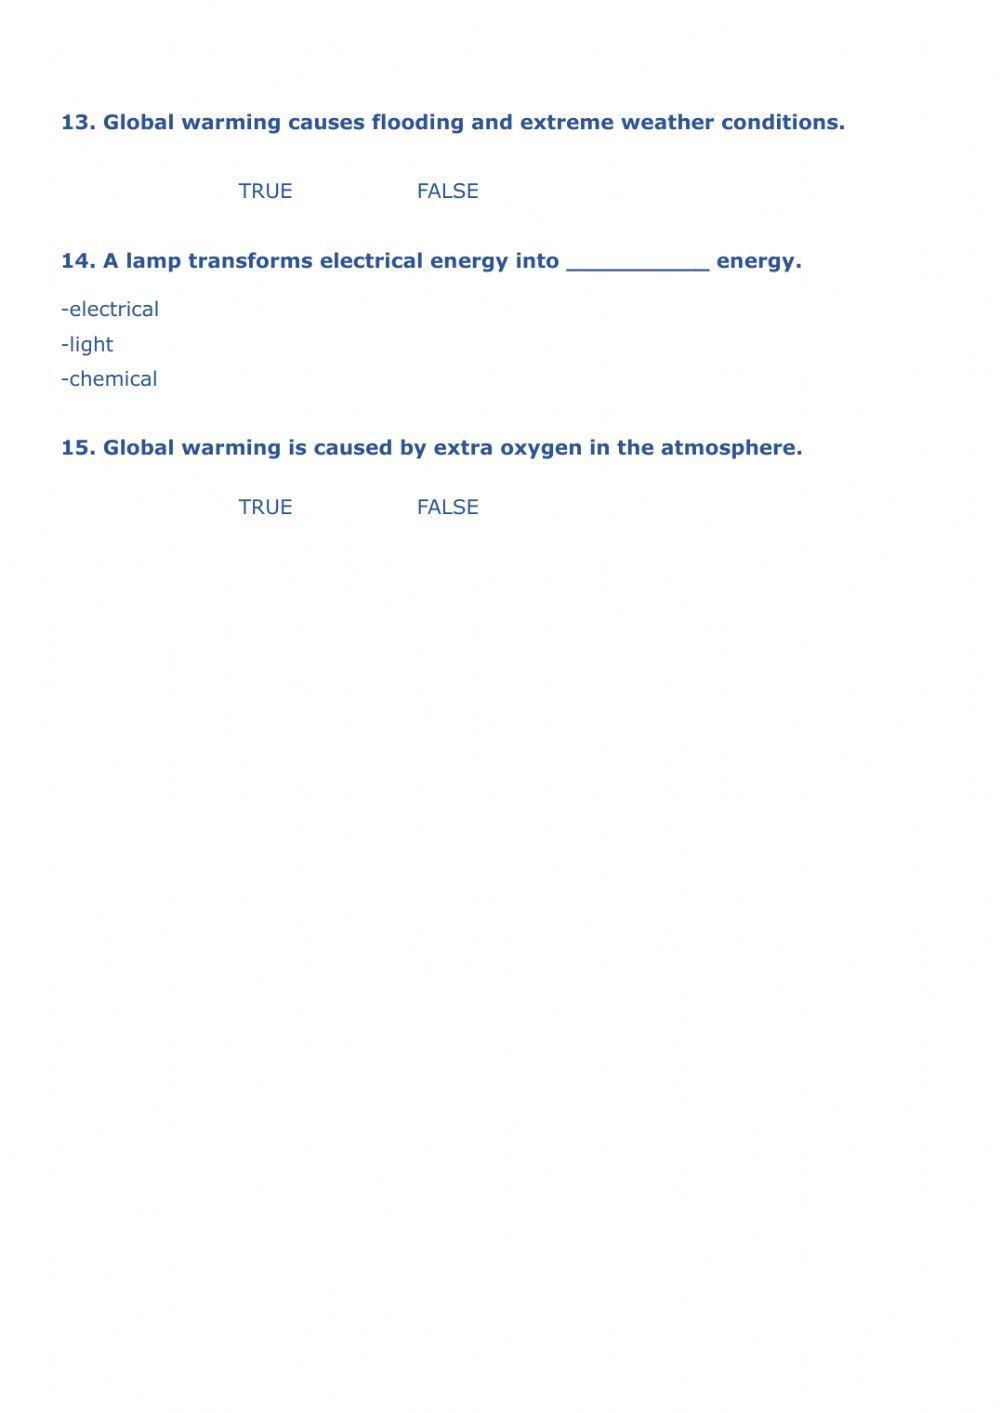 Unit 4 - energy test- natural science